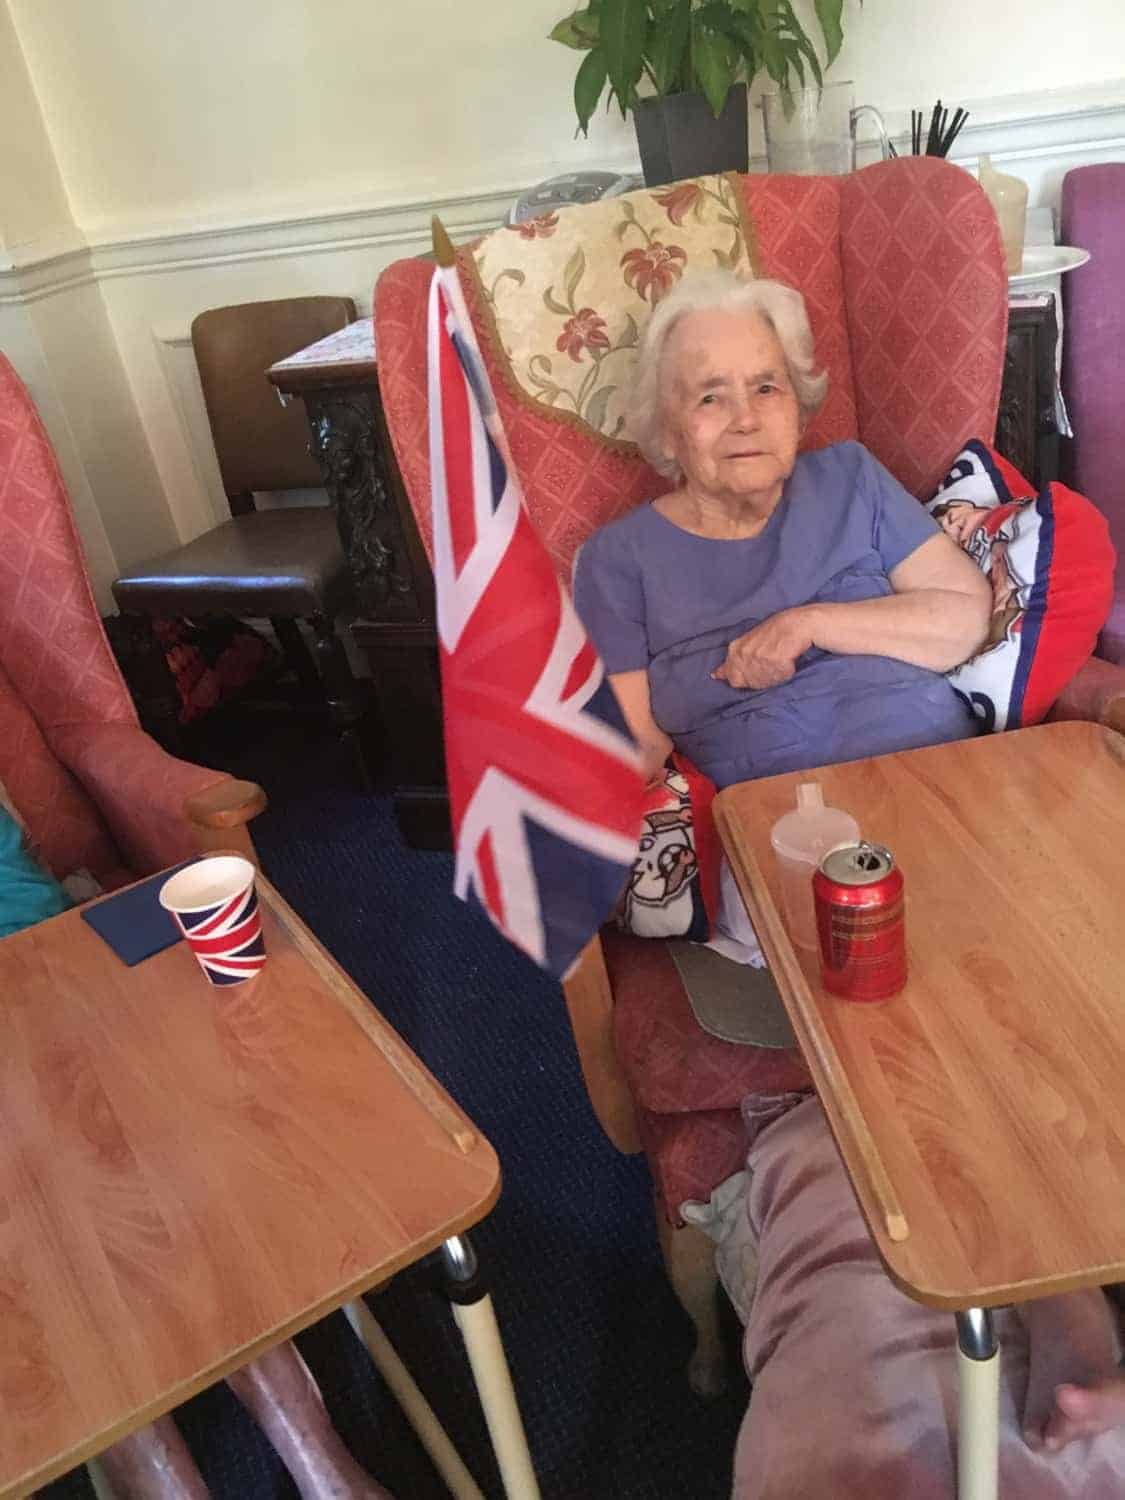 An elderly lady sitting comfortably in a chair, with a British flag displayed next to her in an art gallery, exuding a sense of national pride and contentment.